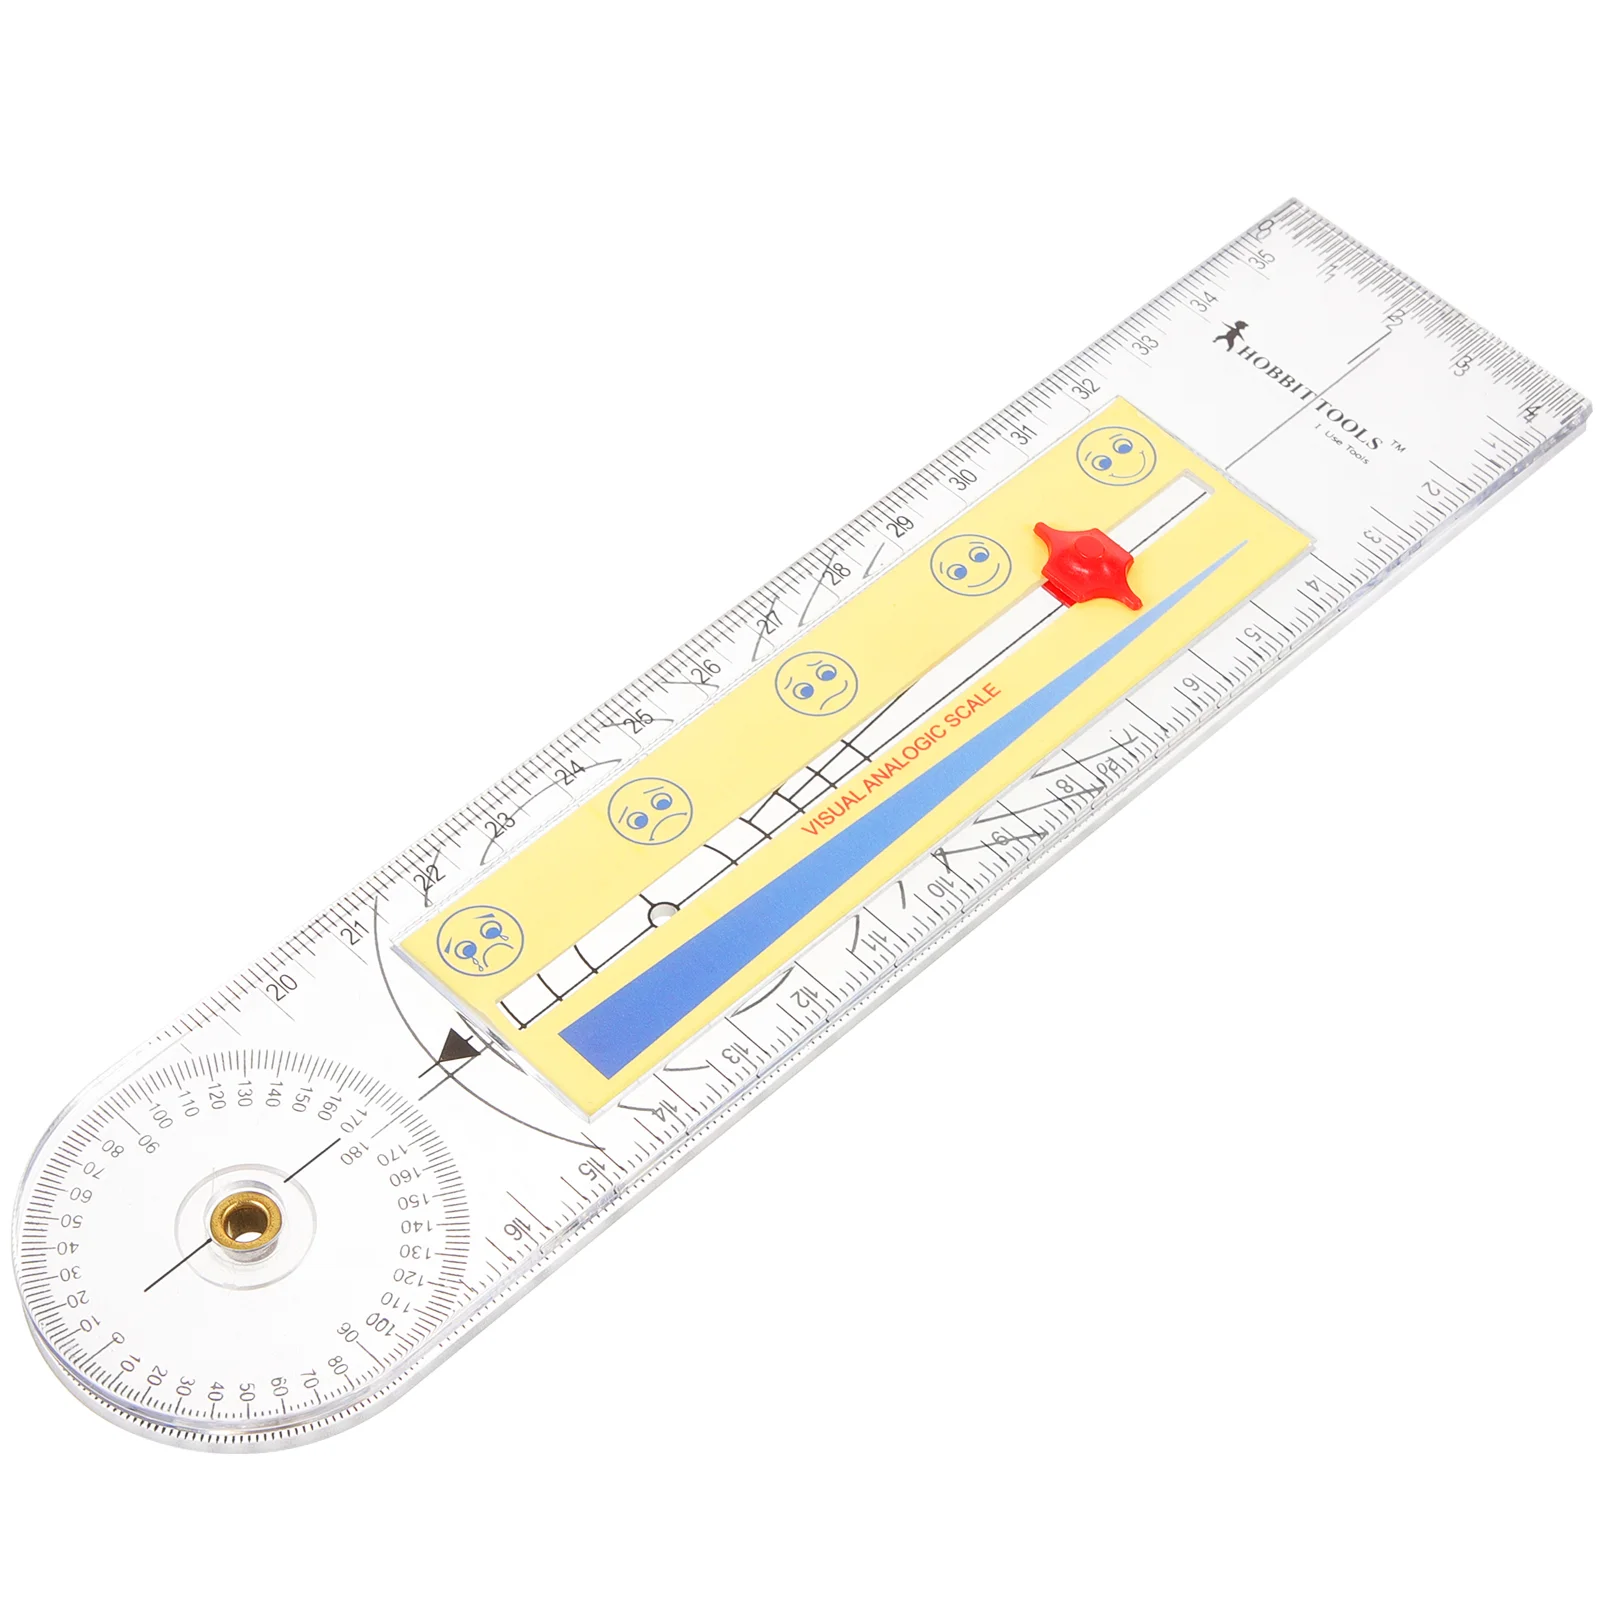 Angle Finder Tool Finger Goniometer Measuring Rotary Medical Abs Ruler Hospital Folding orthopedic angle ruler measurement tool protractor finder physical goniometer pvc measuring rotary